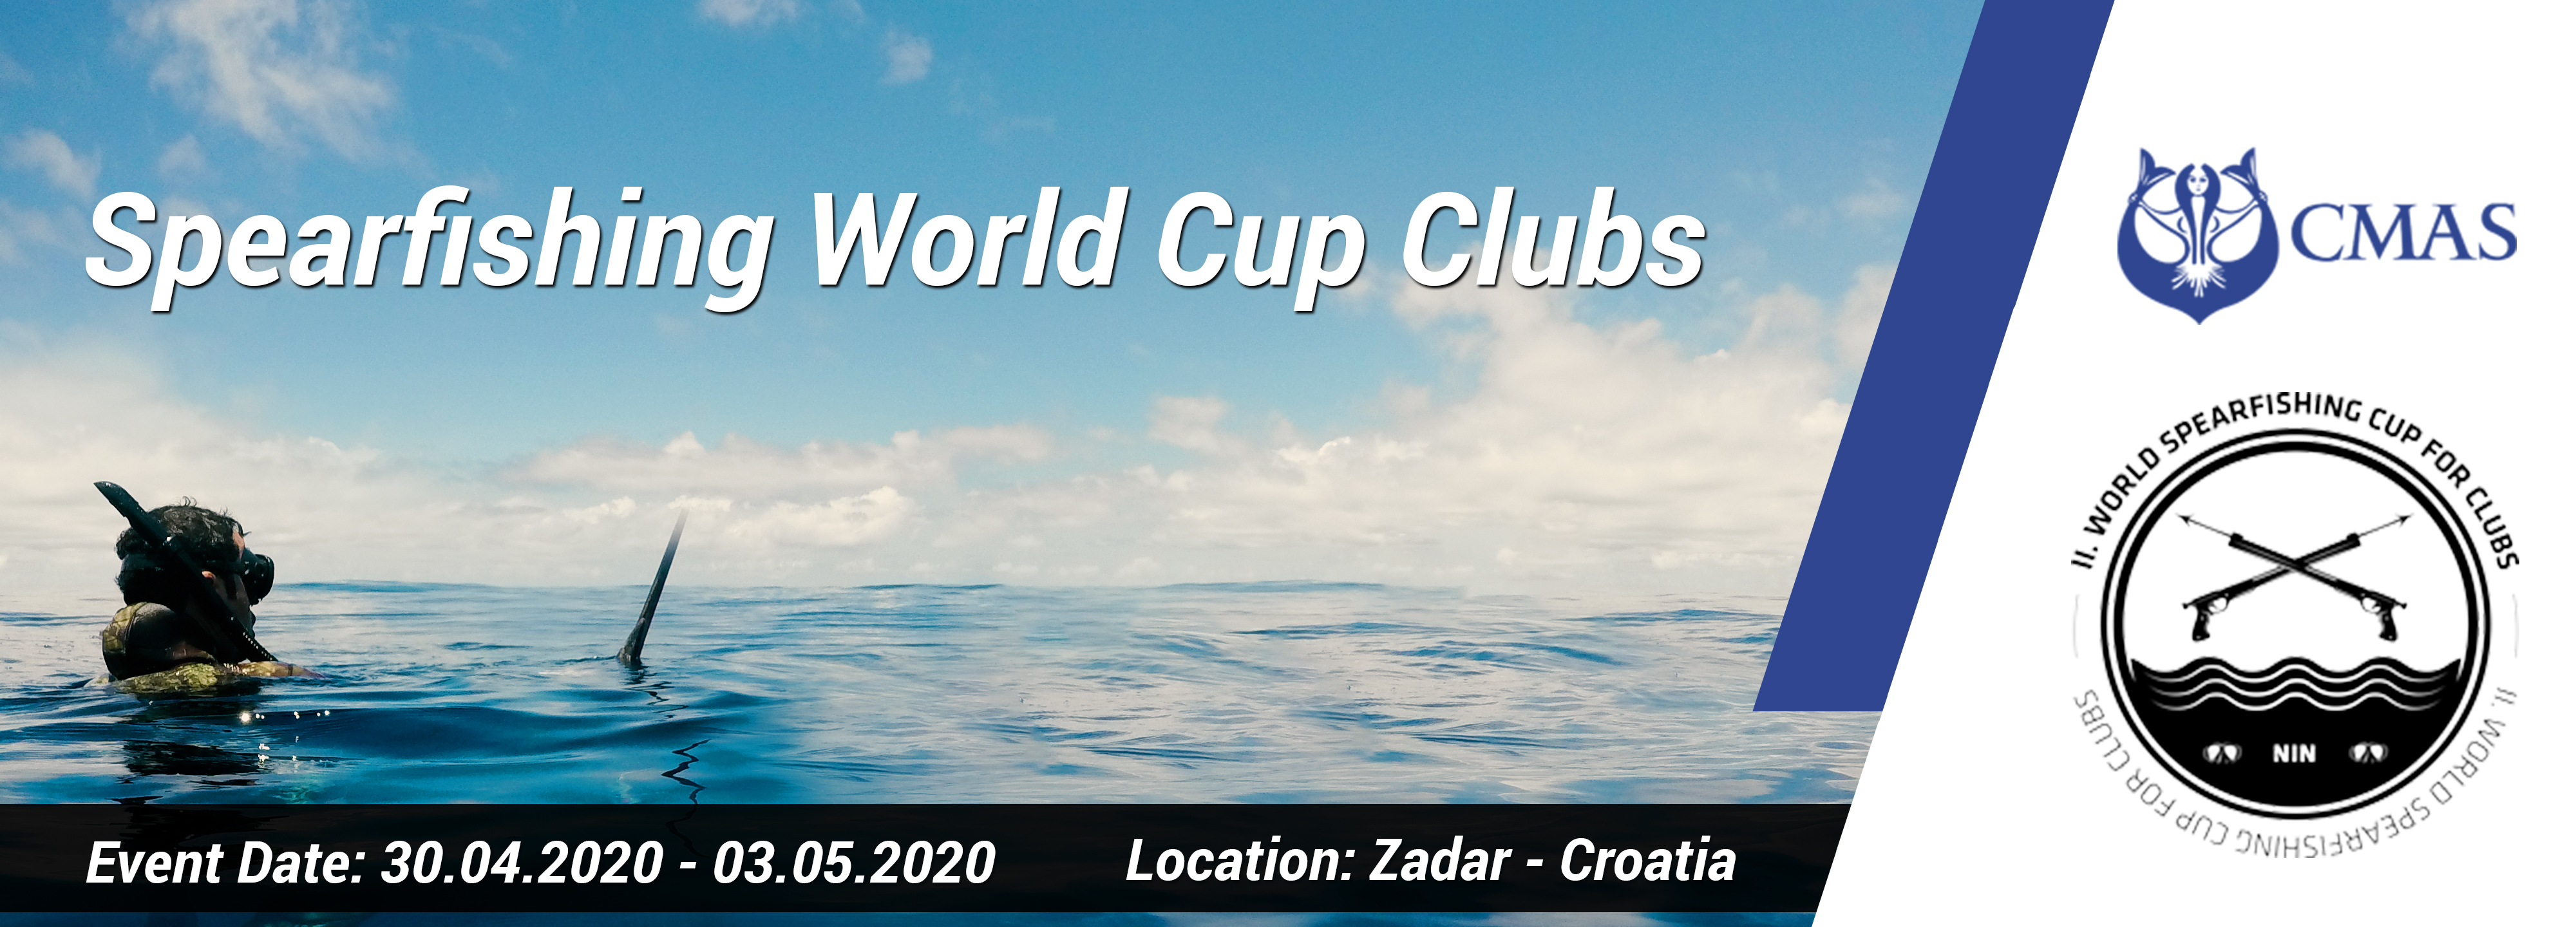 Spearfishing World Cup Clubs